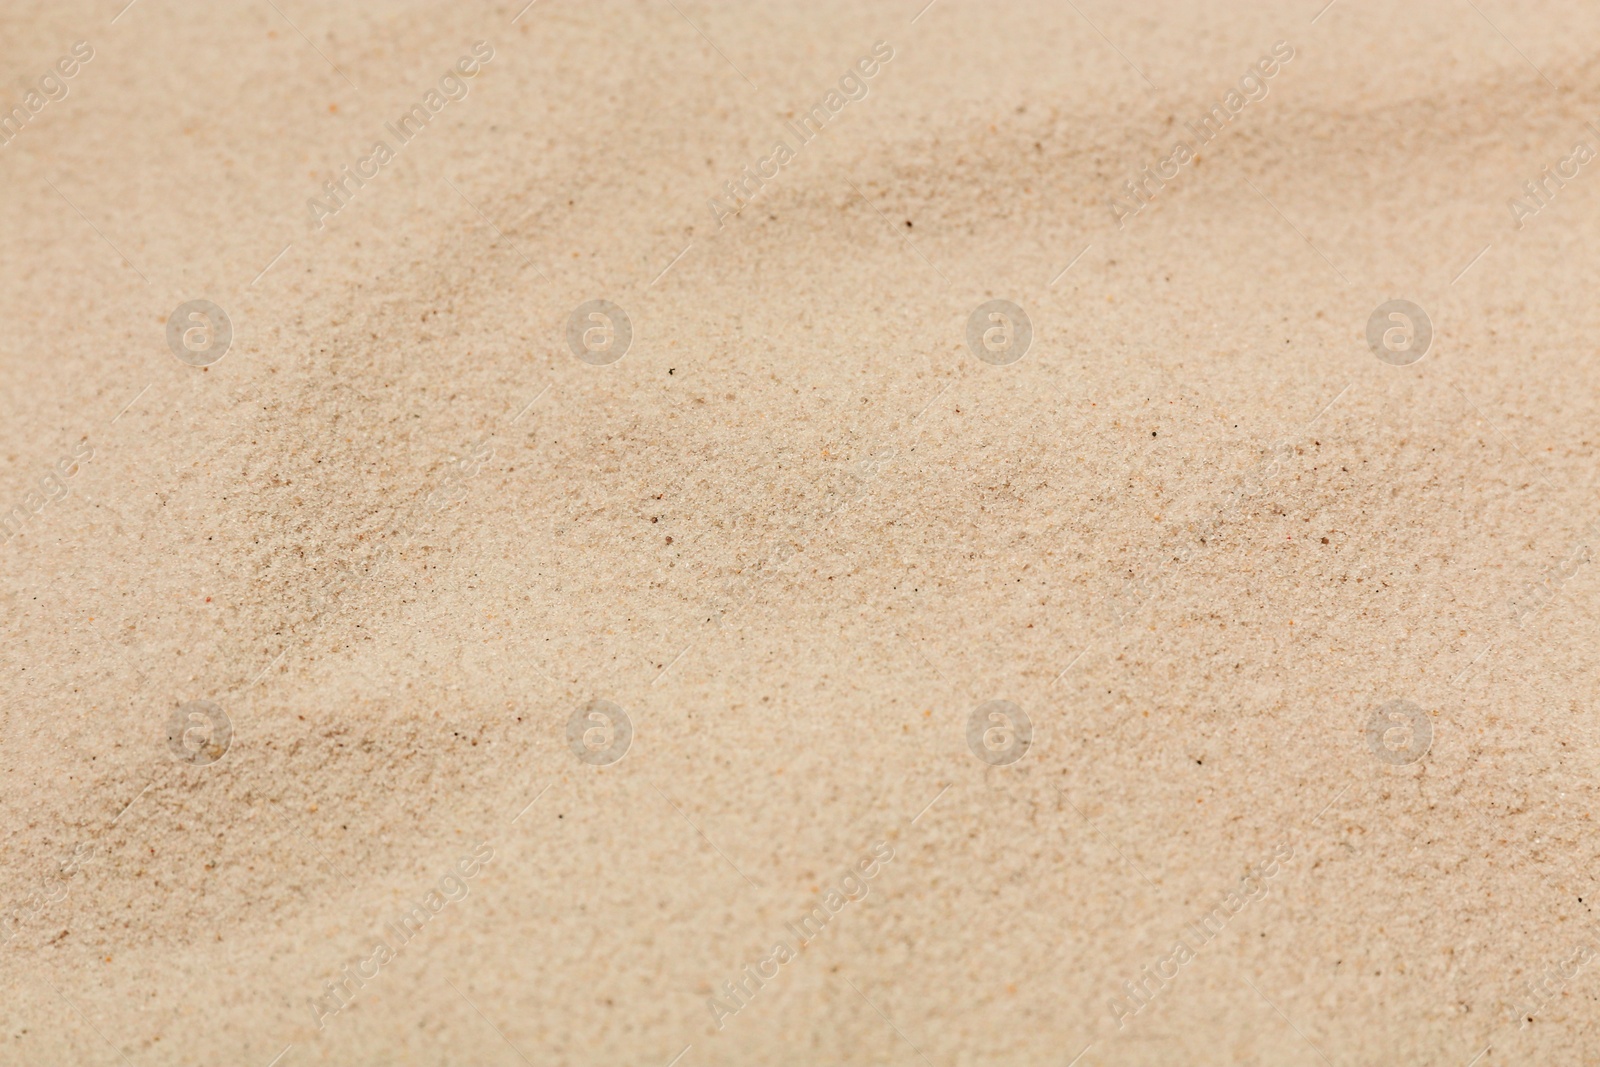 Photo of Dry sand on beach as background, closeup